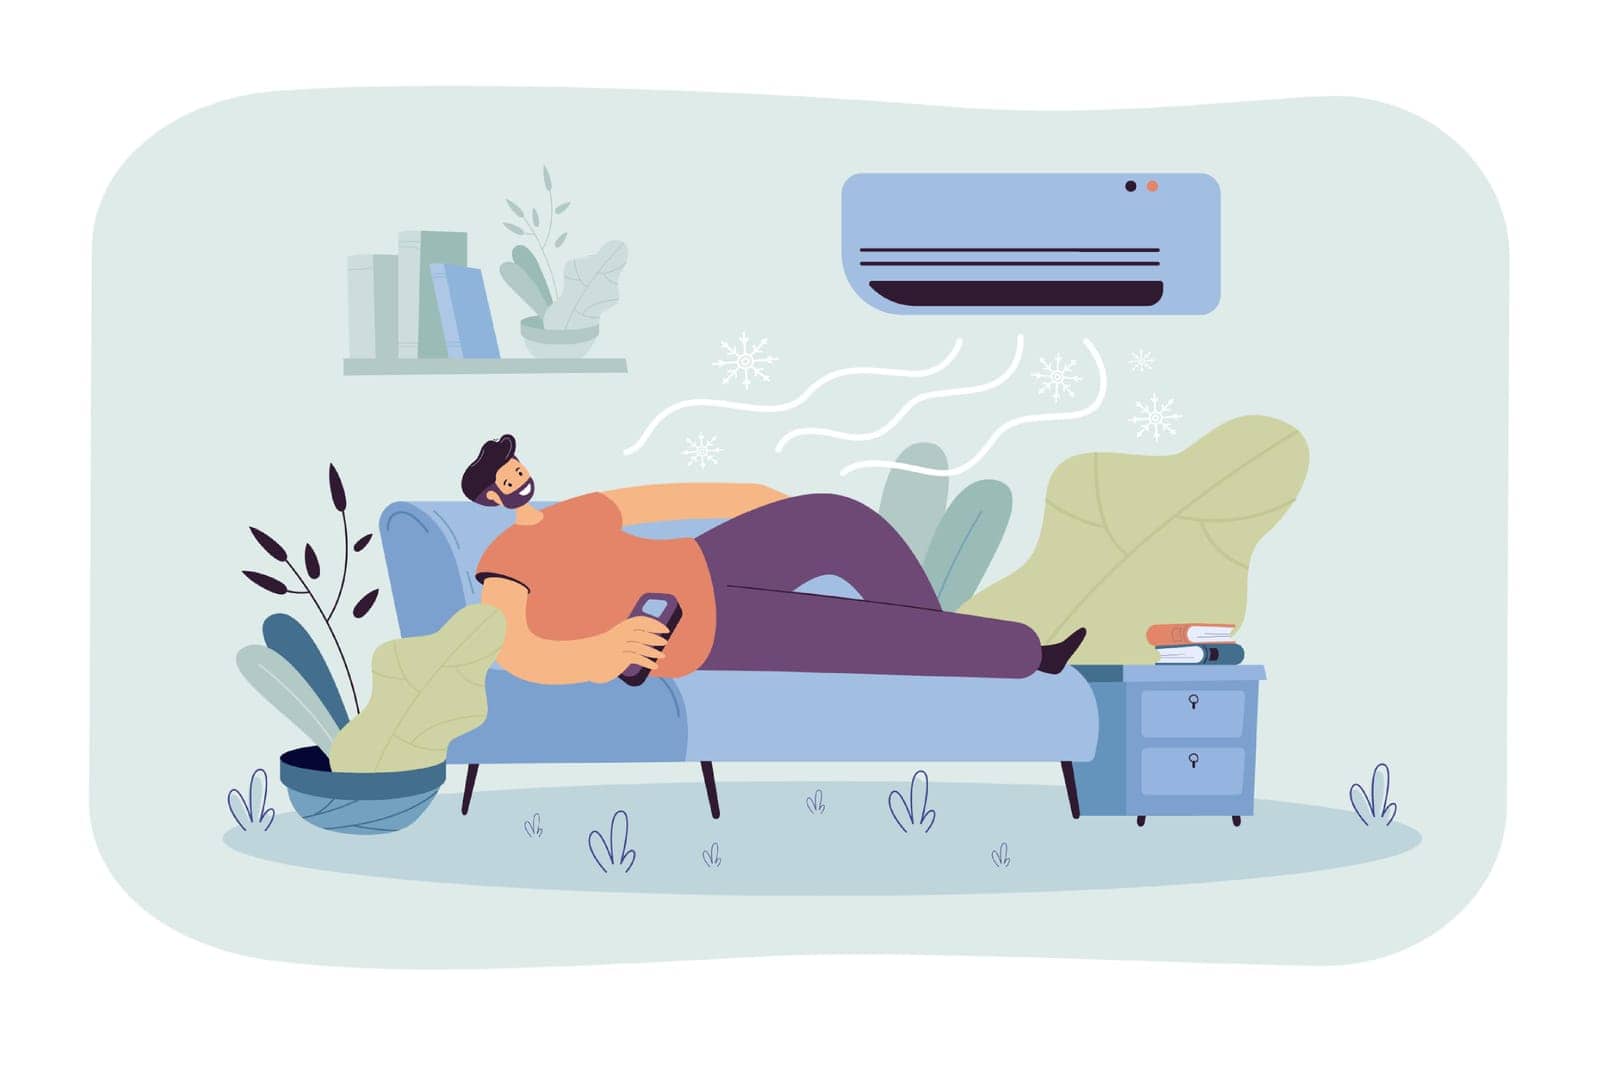 Man relaxing on couch under cold air flow by pchvector